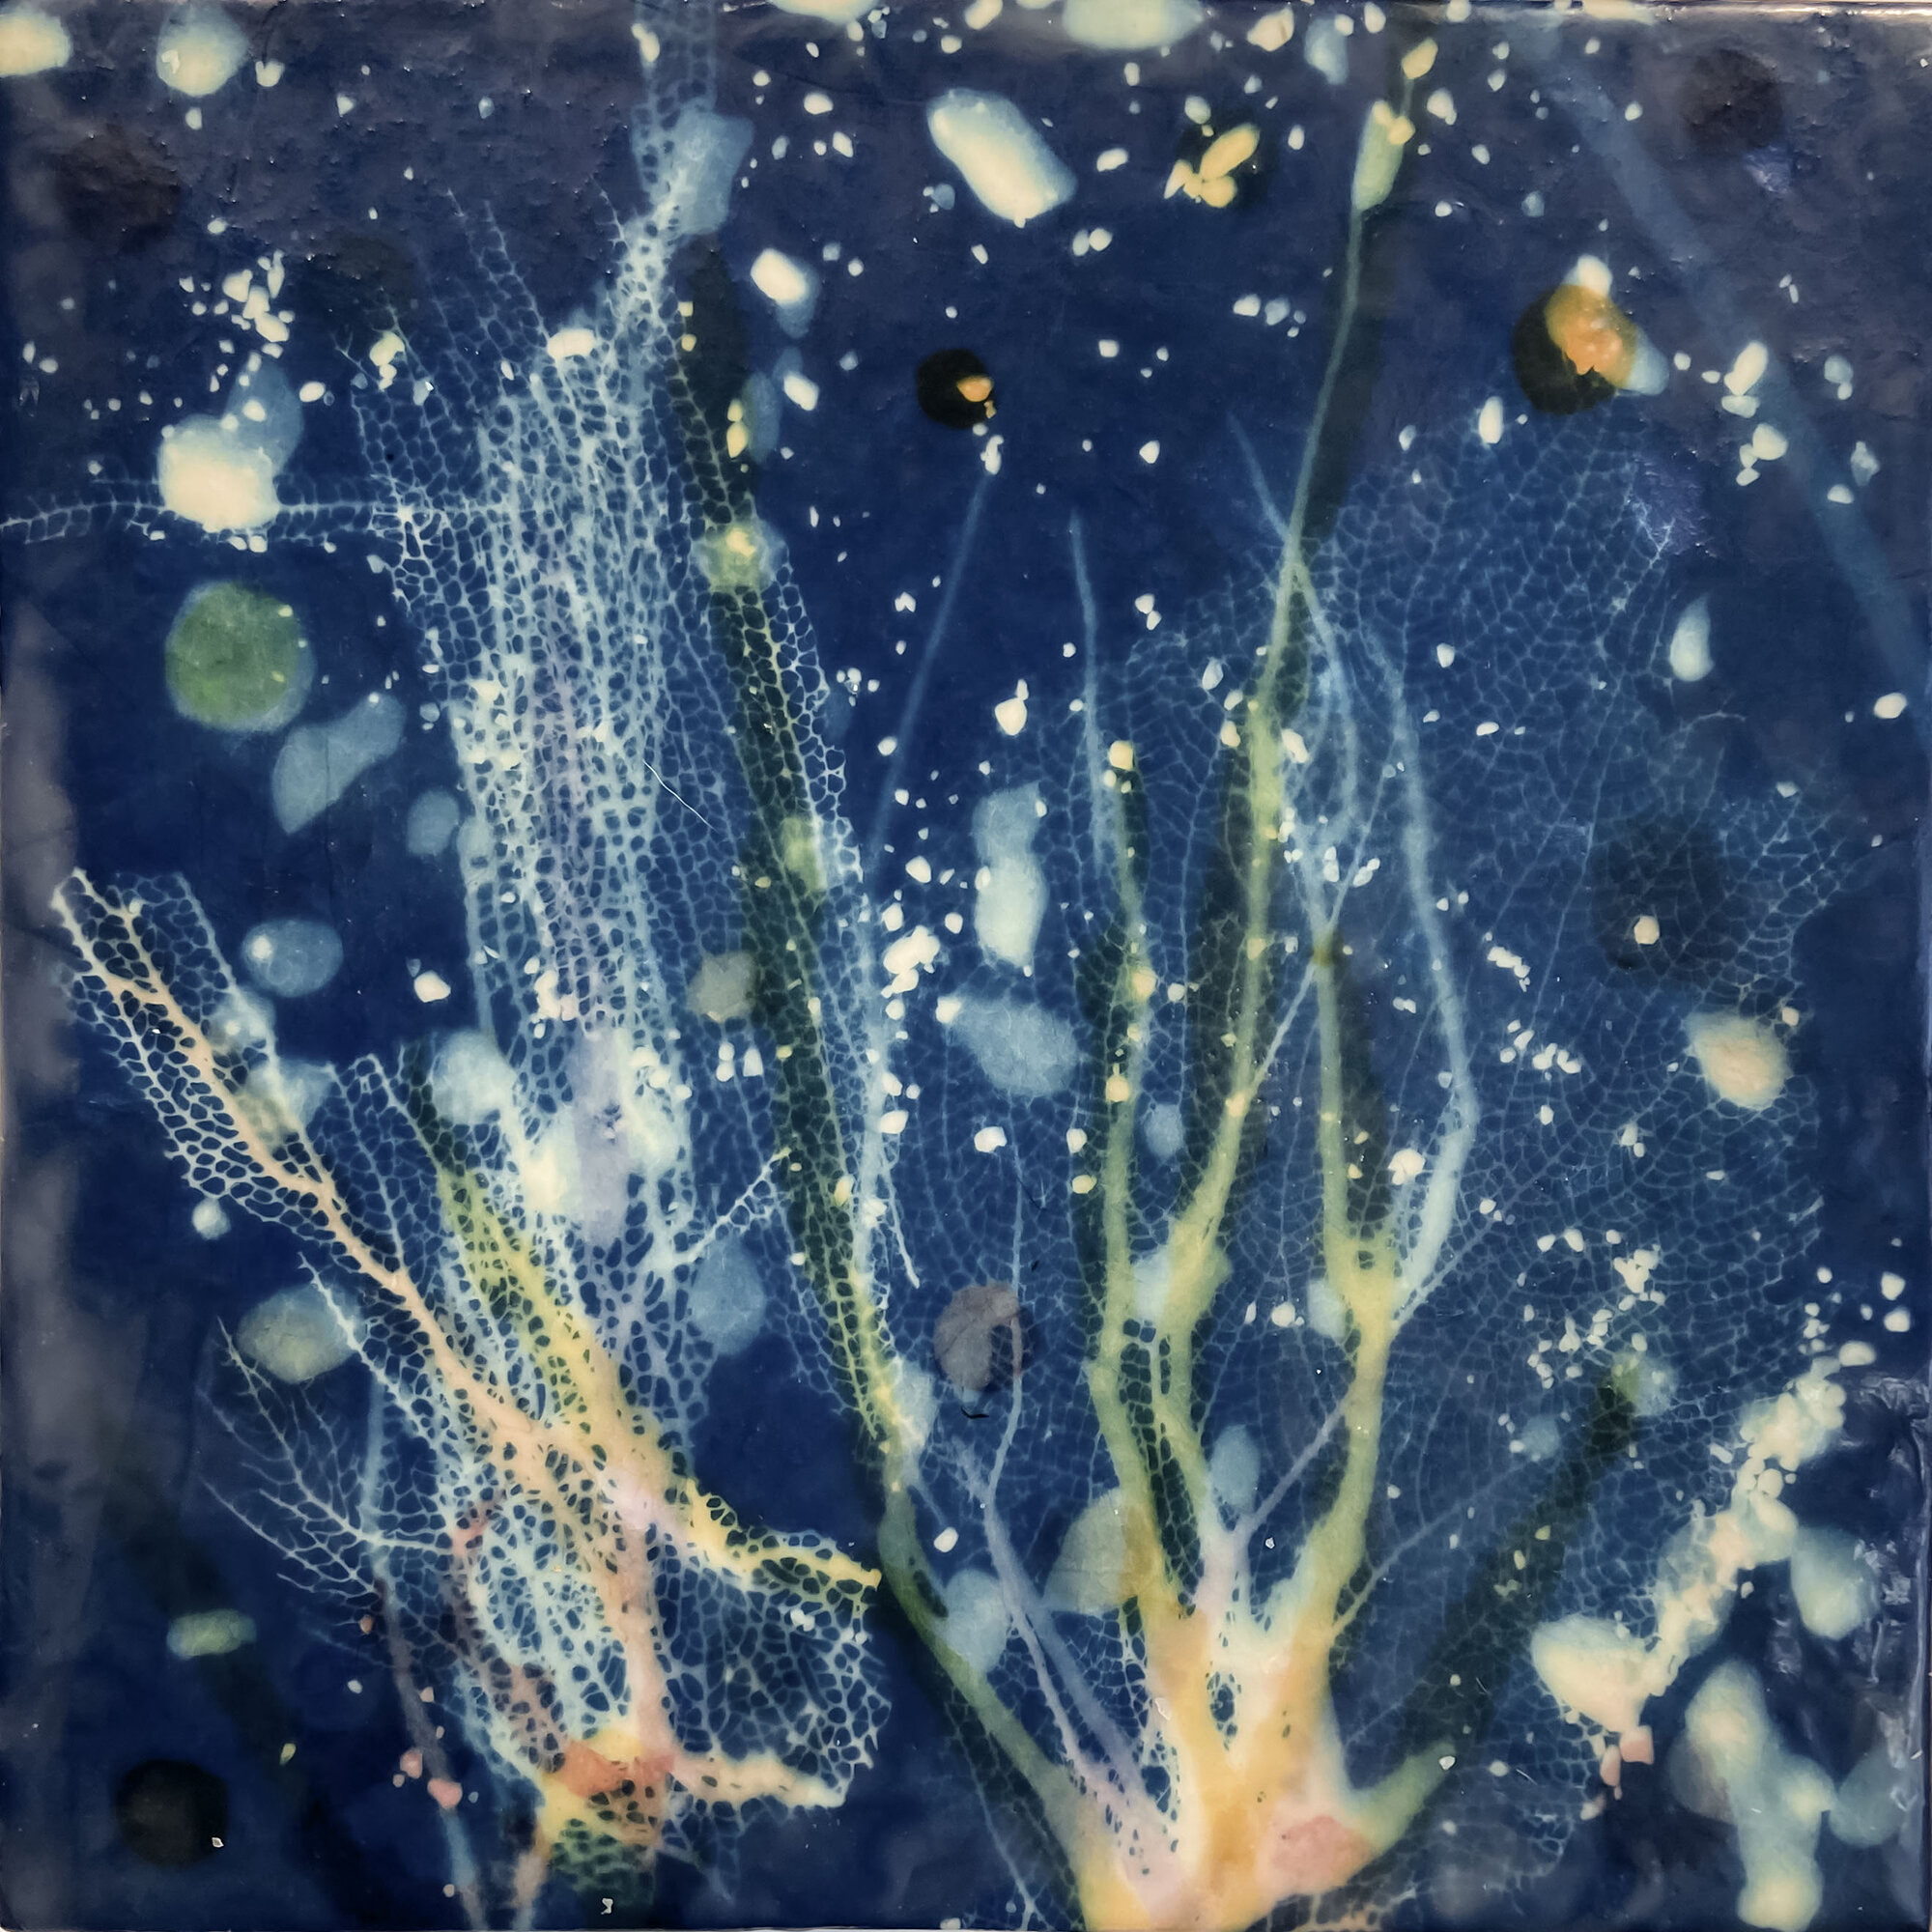   Tobago Coral I, 2020   Cyanotype on Japanese rice paper, colored Japanese rice papers, wax,  encaustic board   10” x 10” 